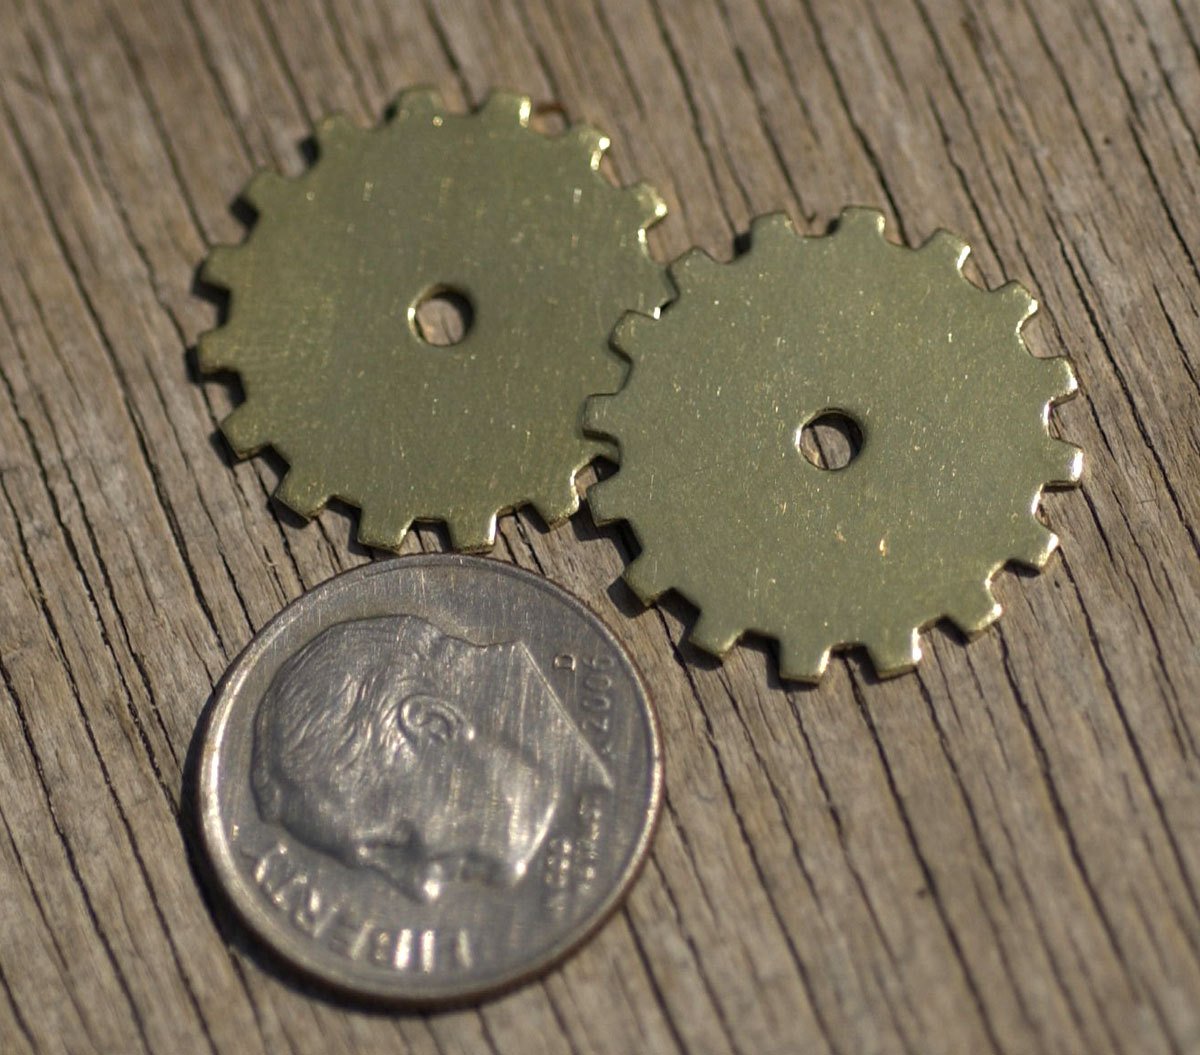 Brass 19mm Gear Cog with Blank 2mm Cutout Cutout for Enameling Stamping Texturing Blanks